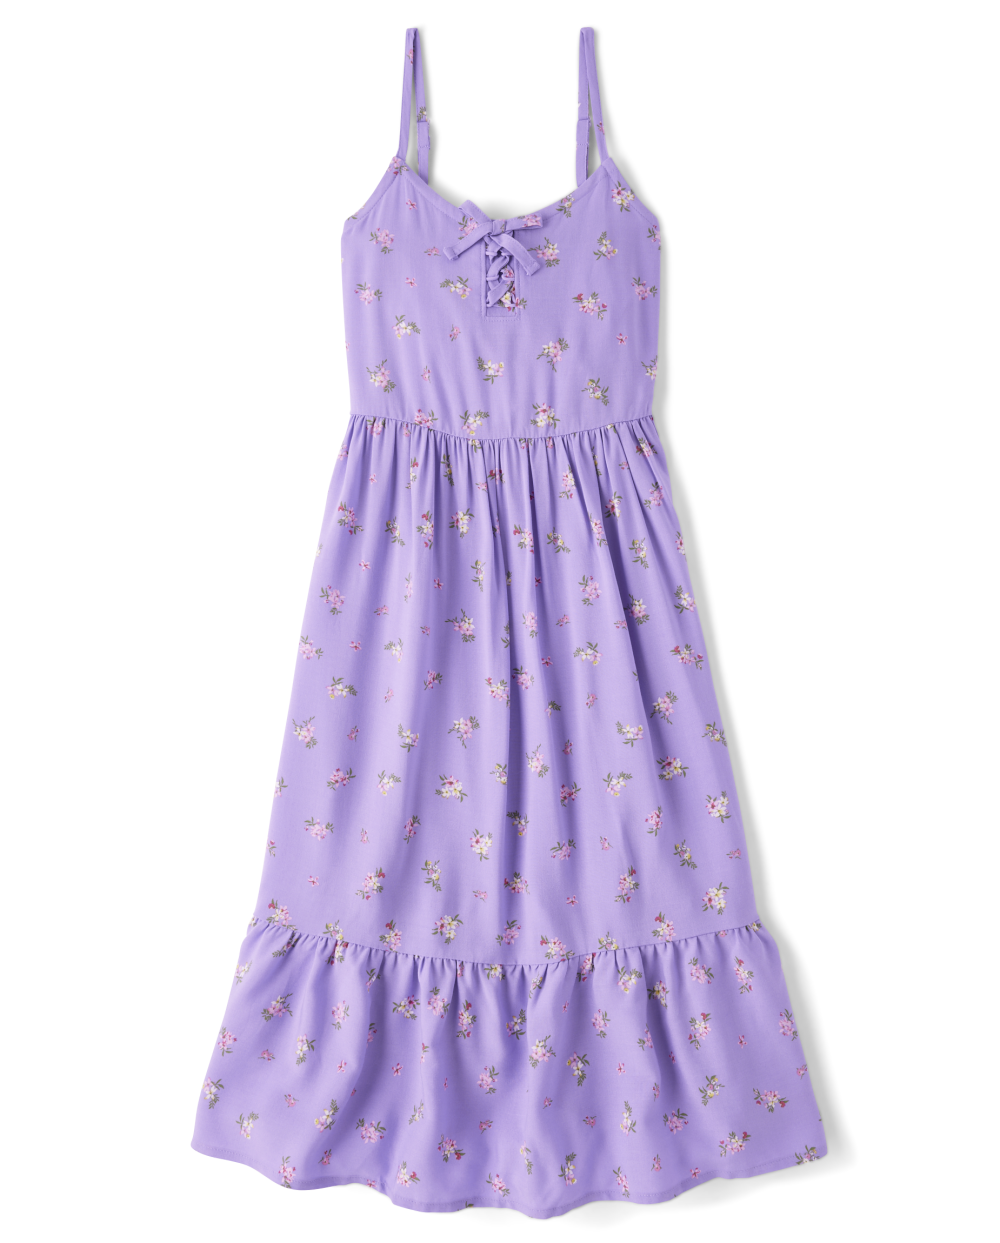 Girls V-neck Rayon Lace-Up Sleeveless Smocked Floral Print Maxi Dress With a Bow(s) and Ruffles